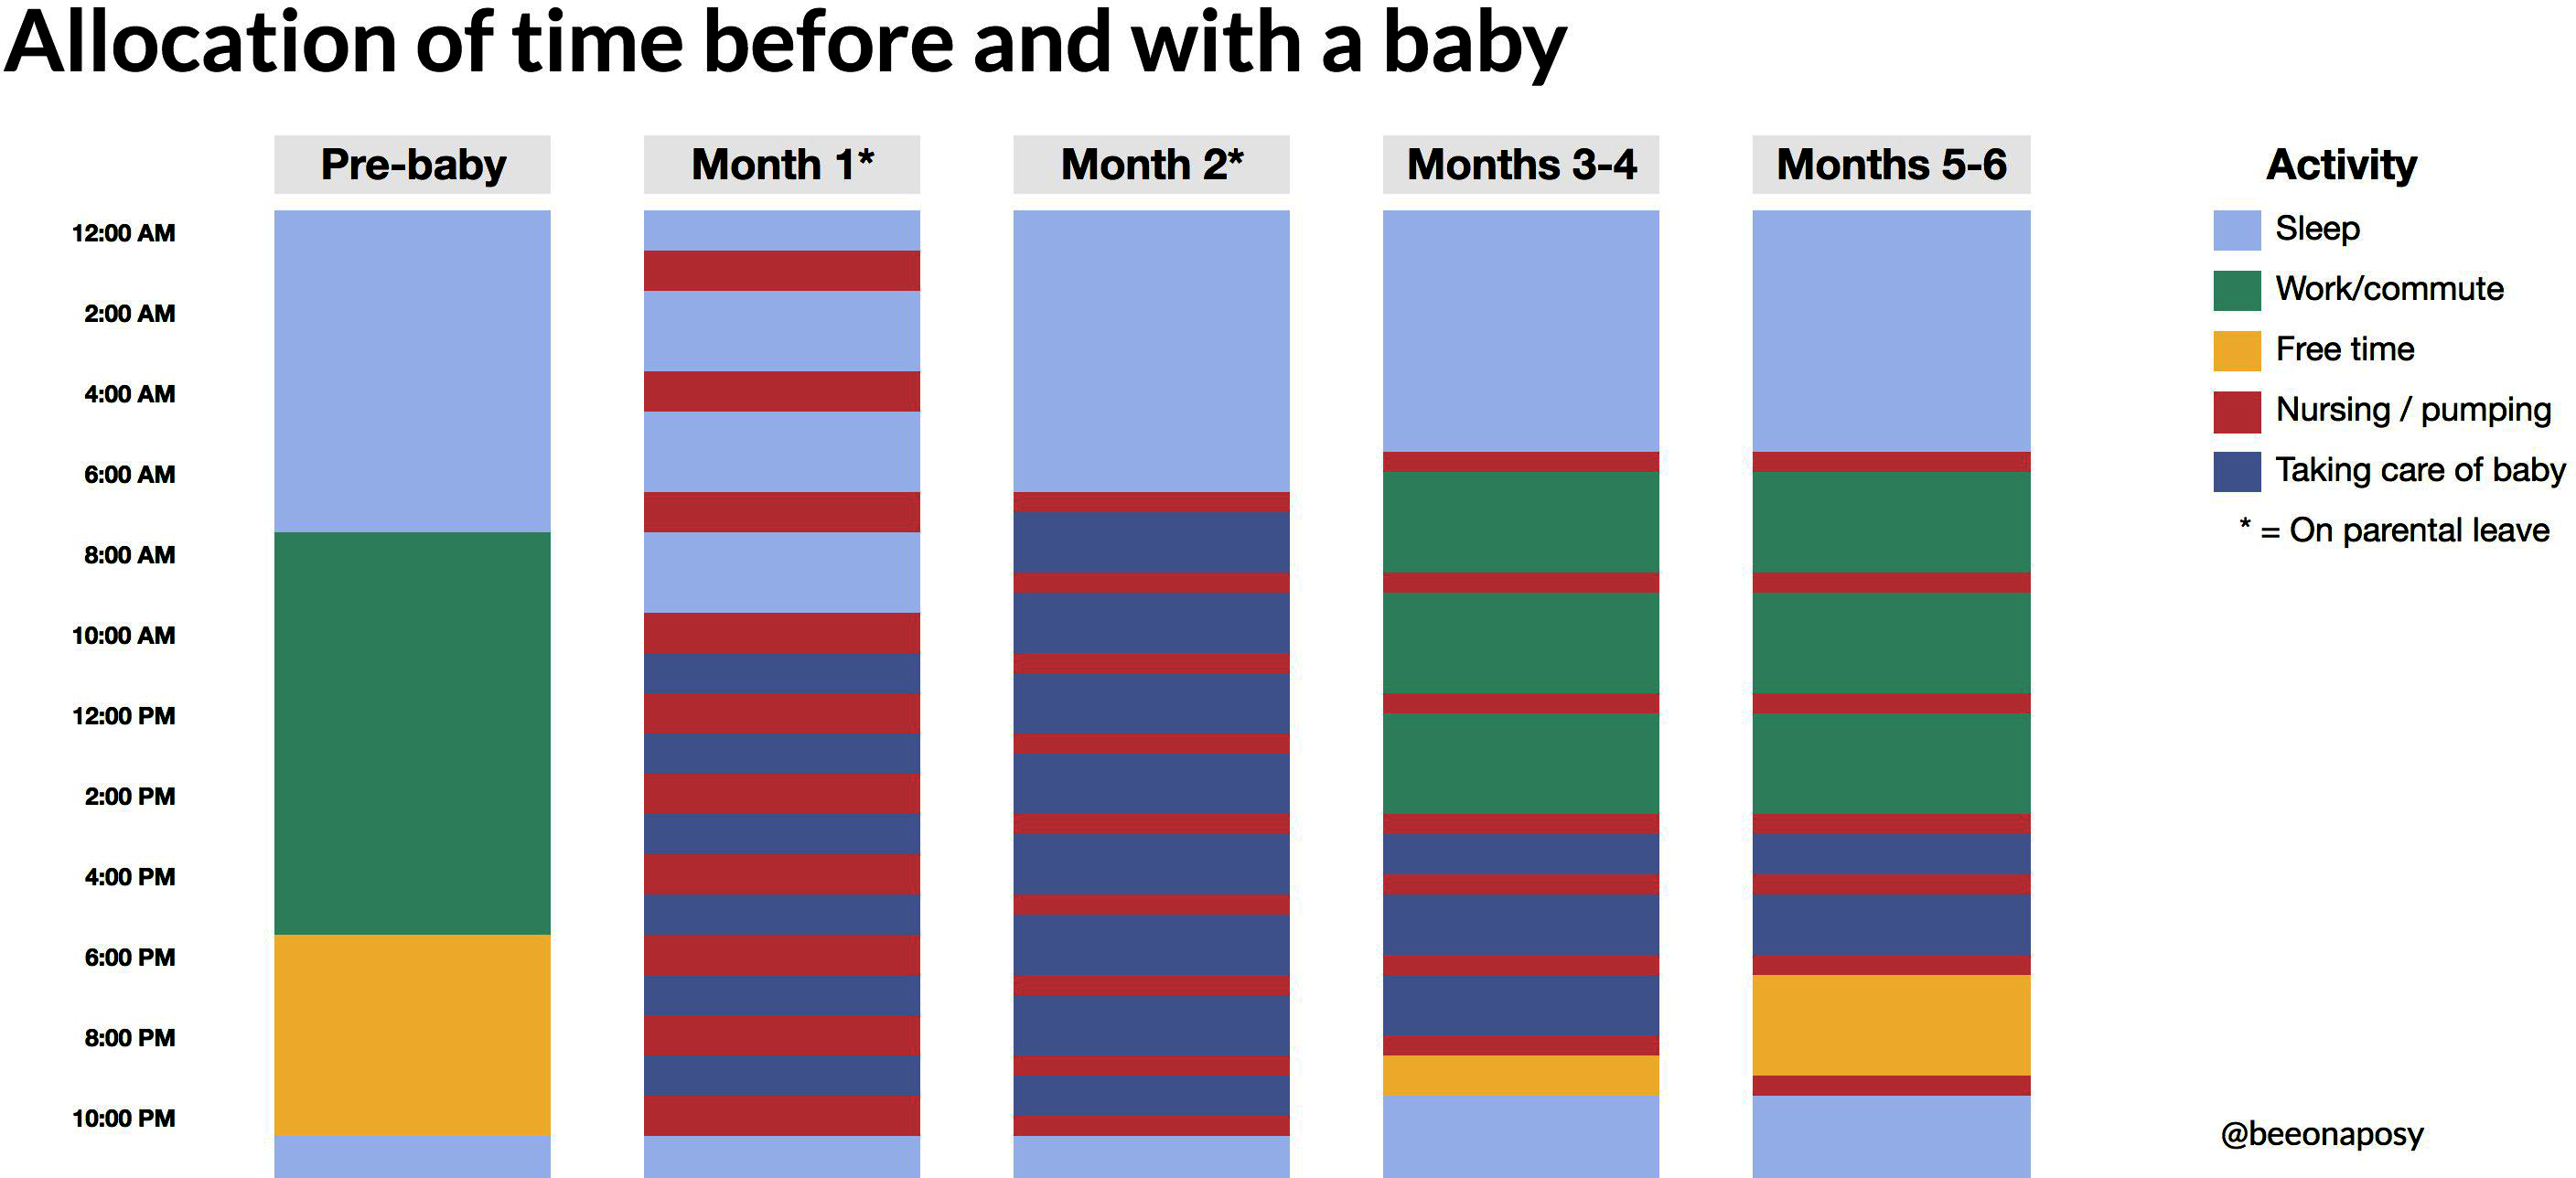 Schedule chart showing the allocation of time before and after having a baby